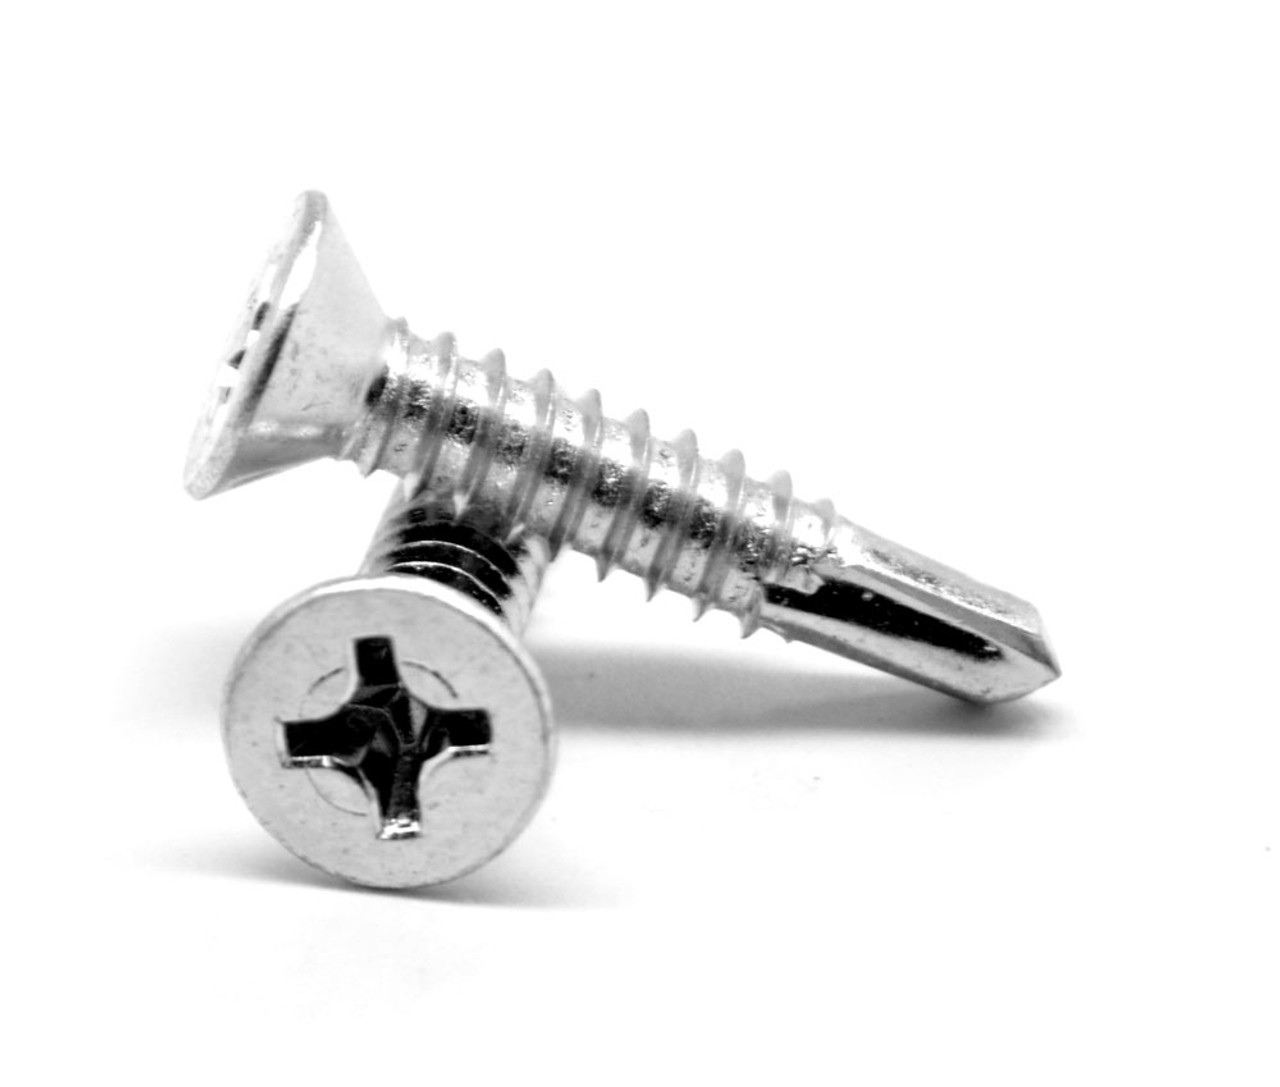 #10-16 x 3/4" (FT) Self Drilling Screw Phillips Flat Head #3 Point Stainless Steel 18-8